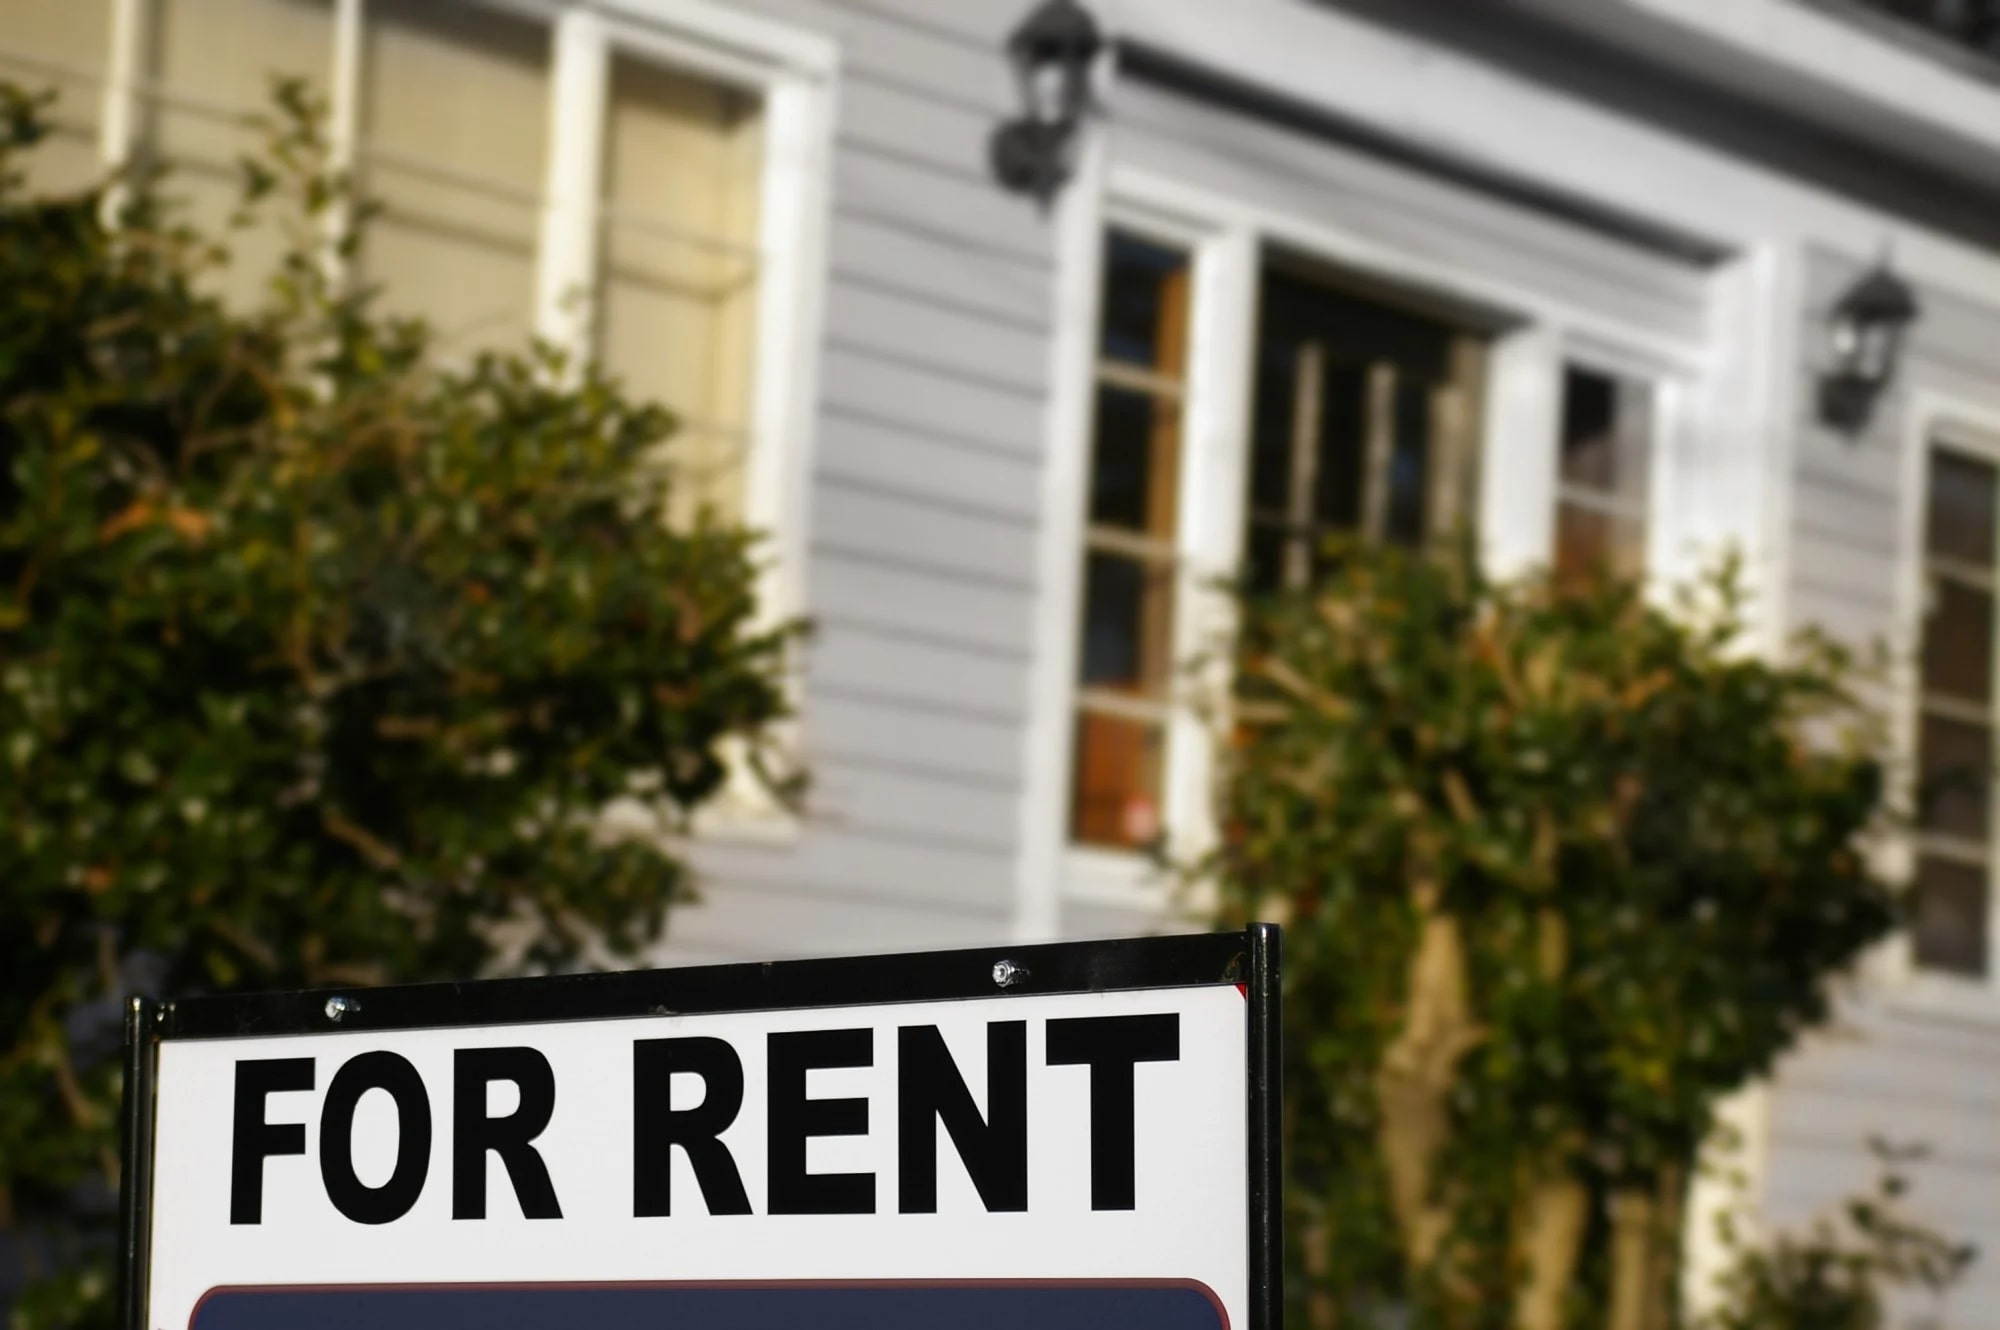 Accidental Landlords in Bellevue, WA: What You Should Know